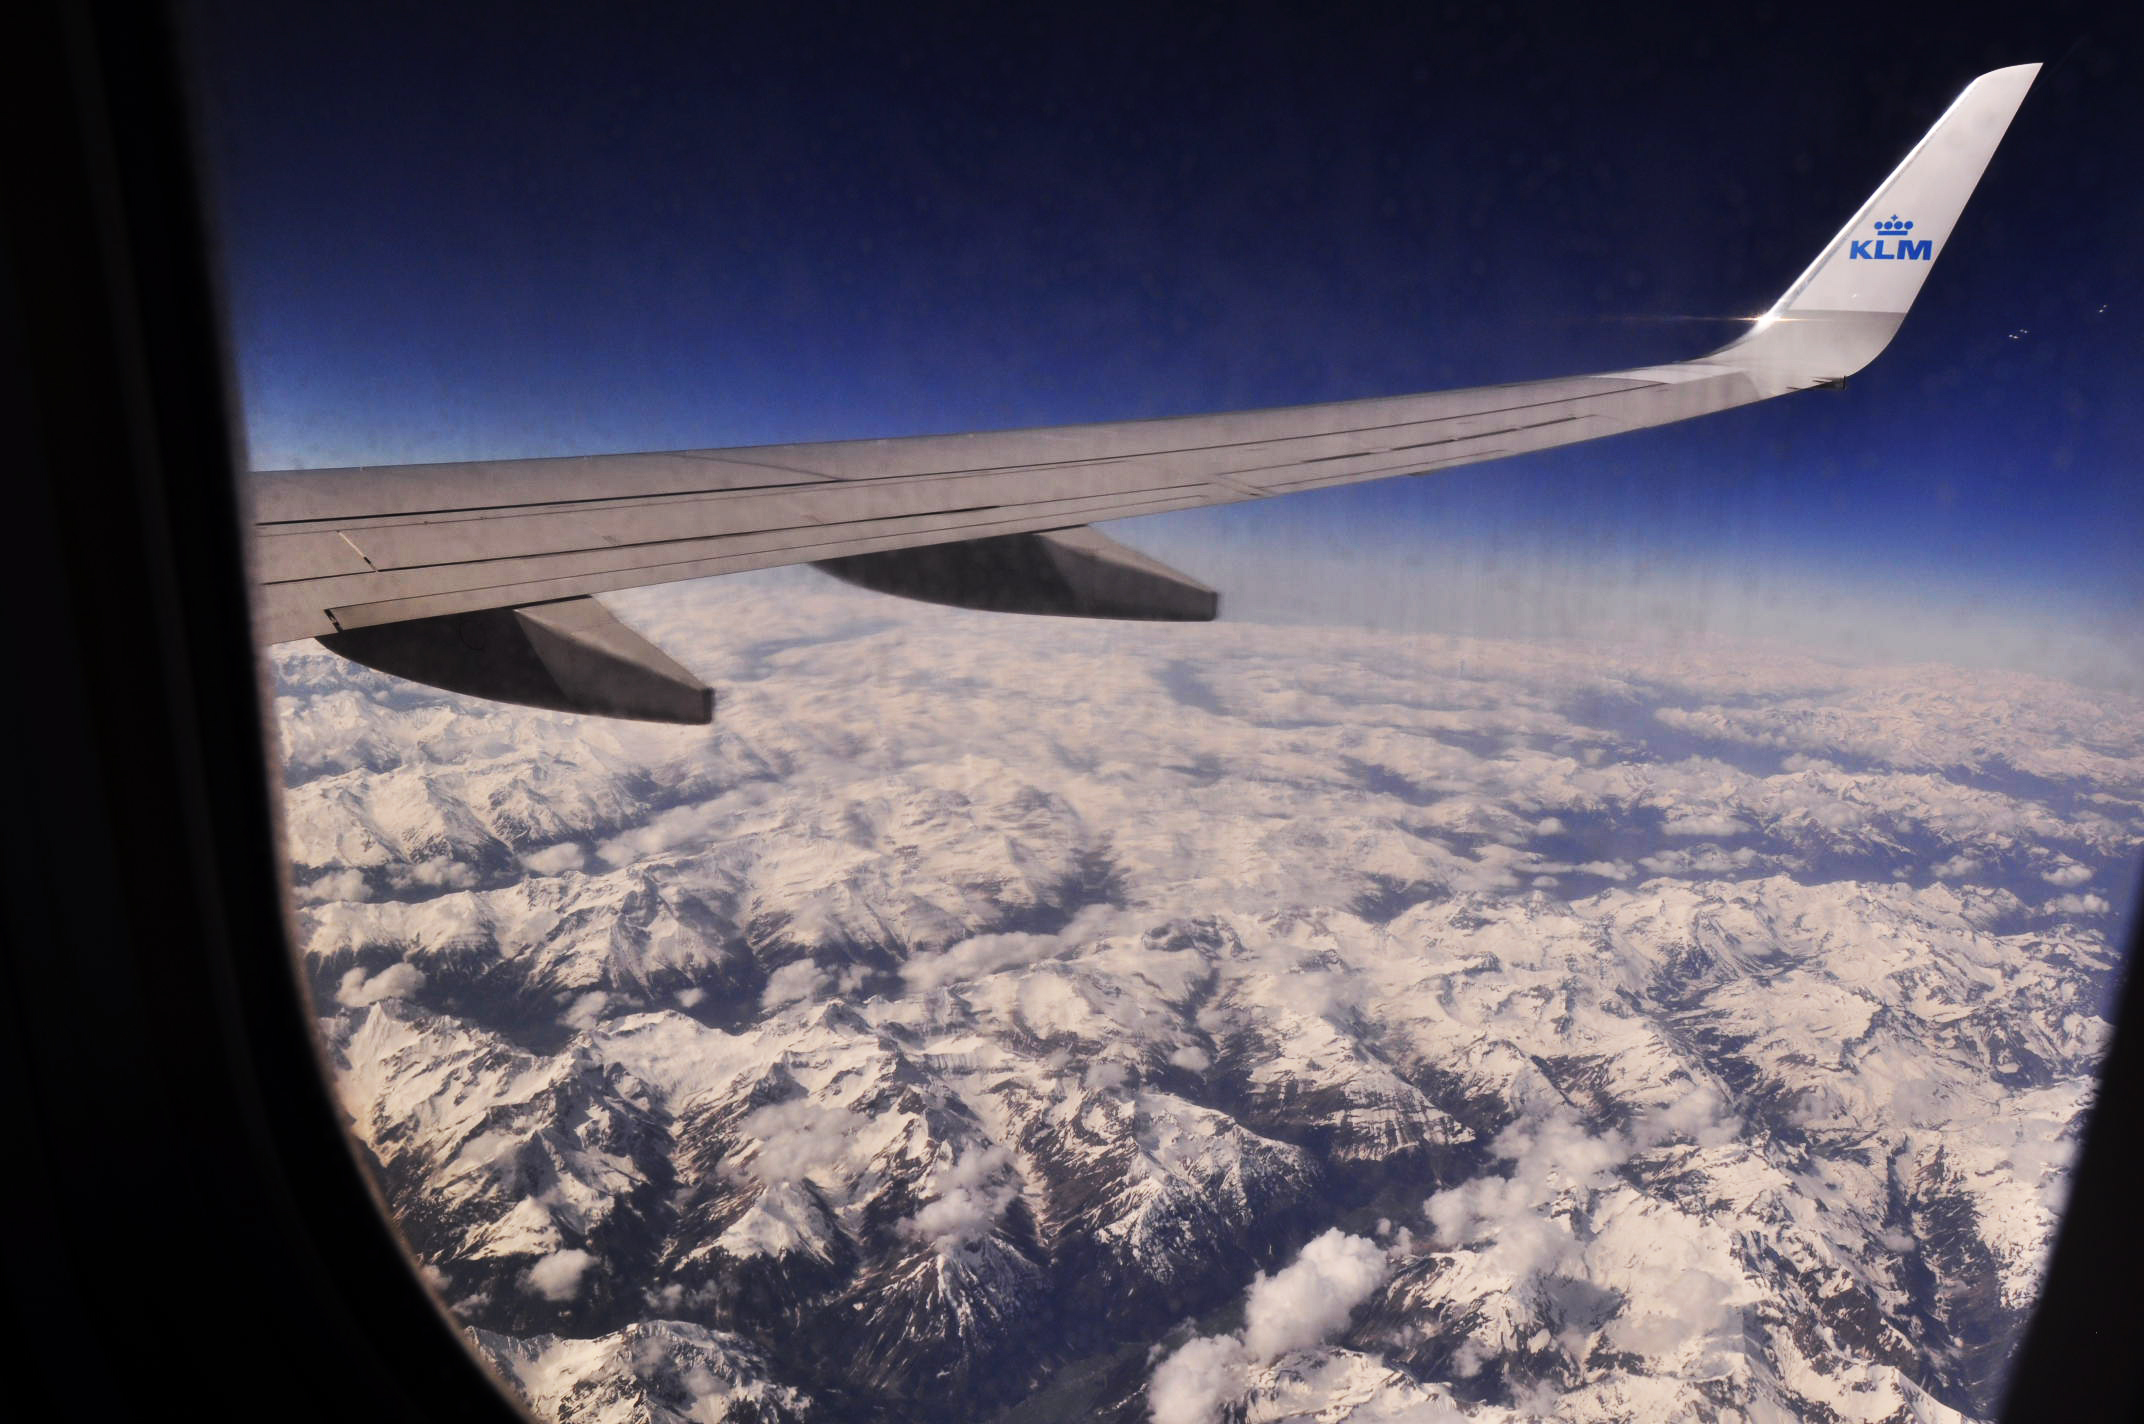 The Alps and the Journey by swimparallel, on Flickr